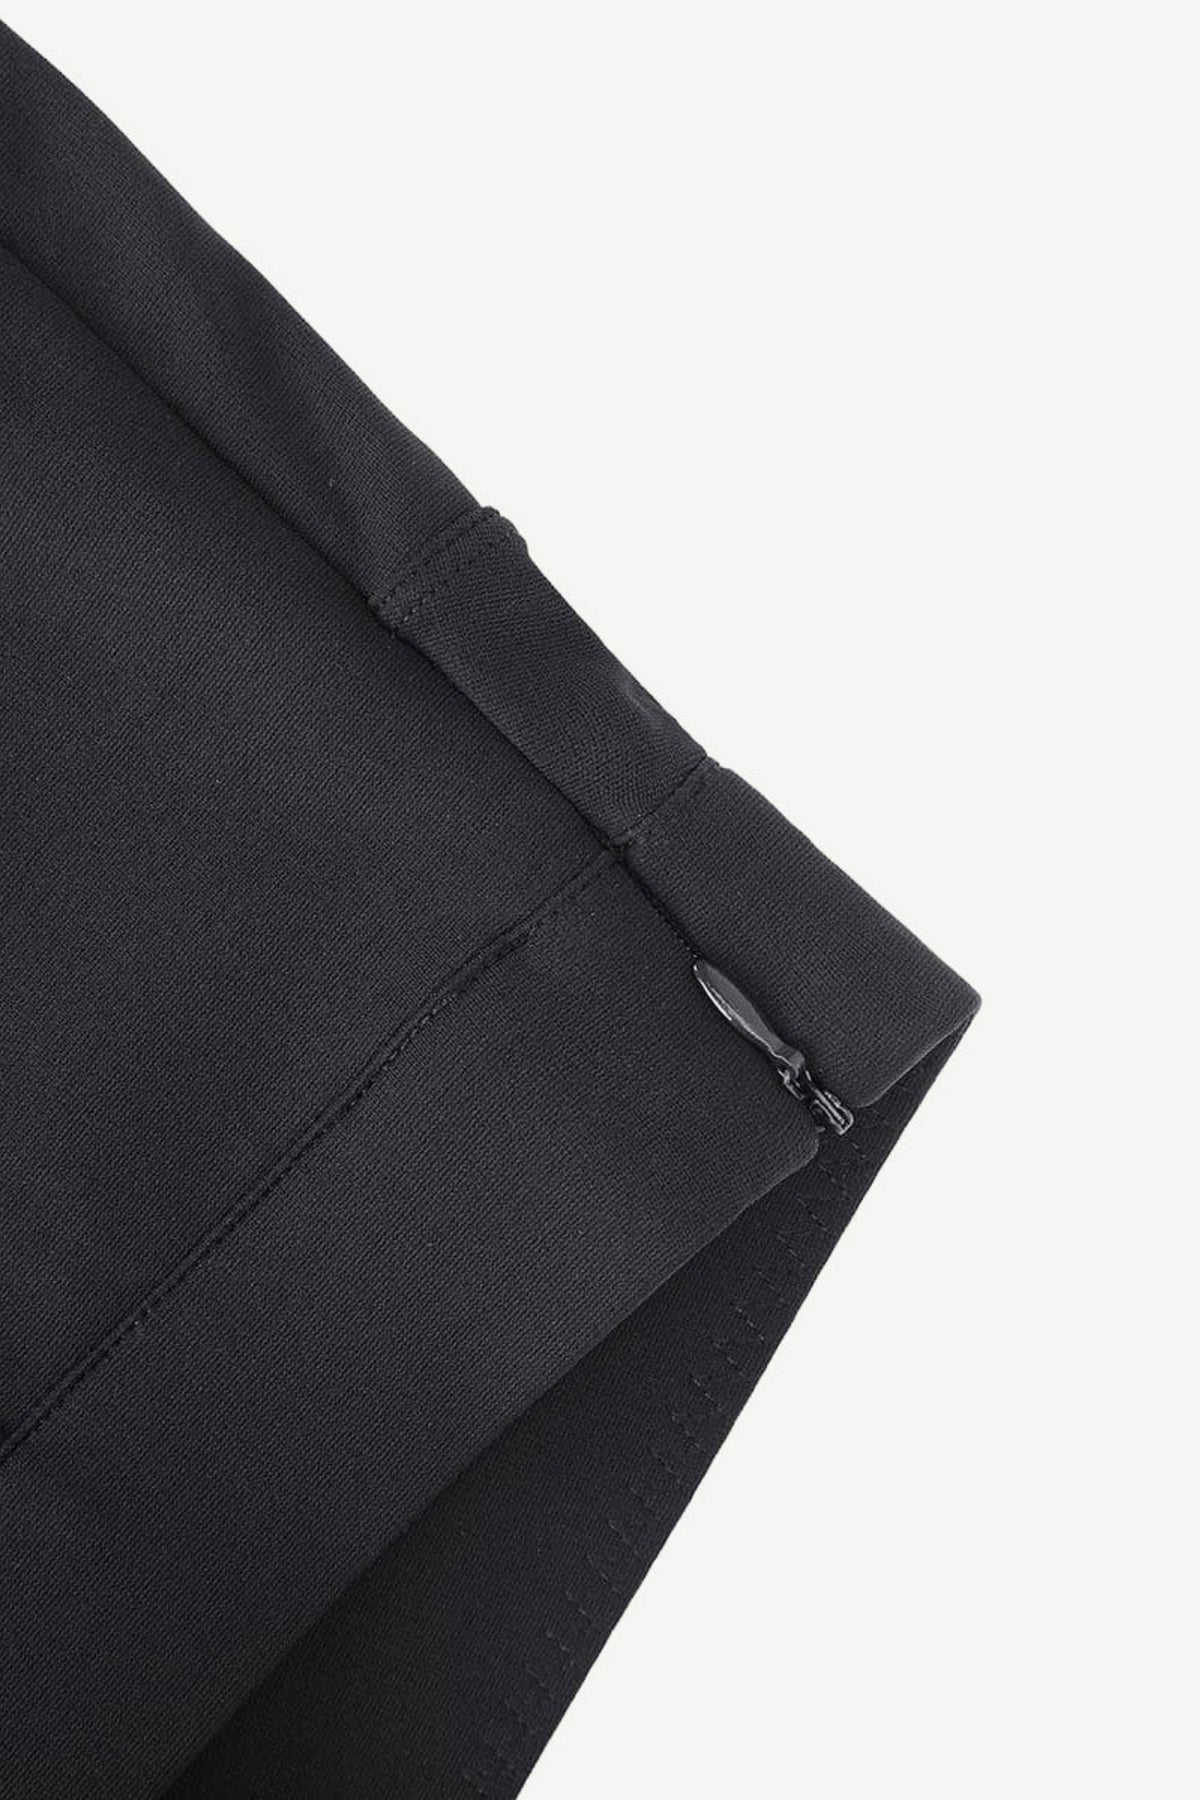 Vogue Shaping Trousers - Black